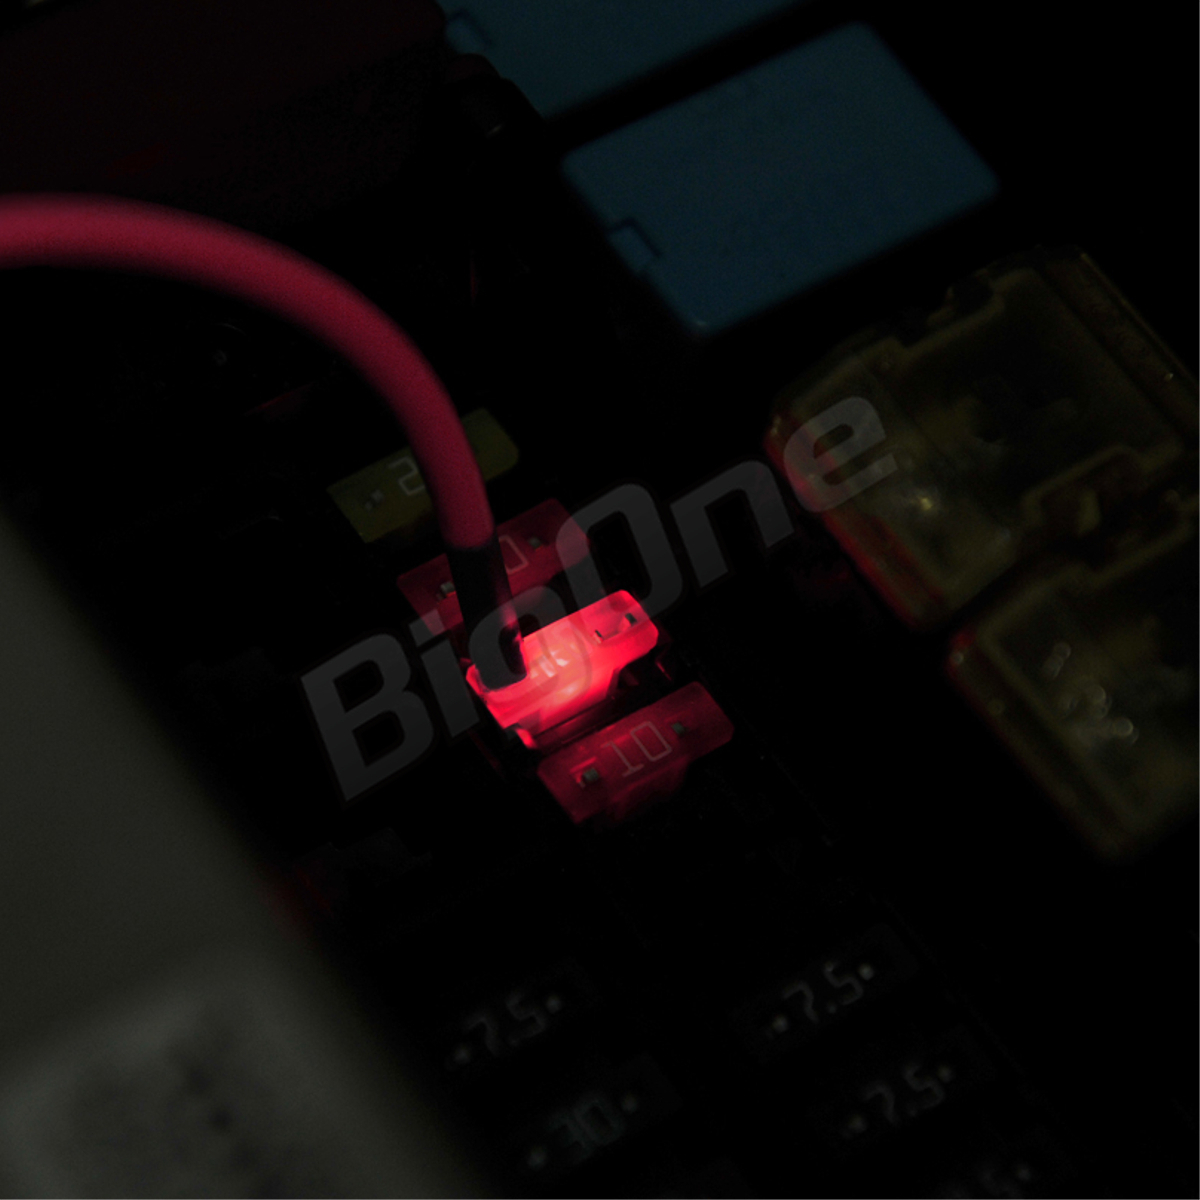 BigOne torn .. light ...... indicator built-in Mini flat type fuse power supply 15A ASP LED chigar lighter ETC drive recorder. connection 